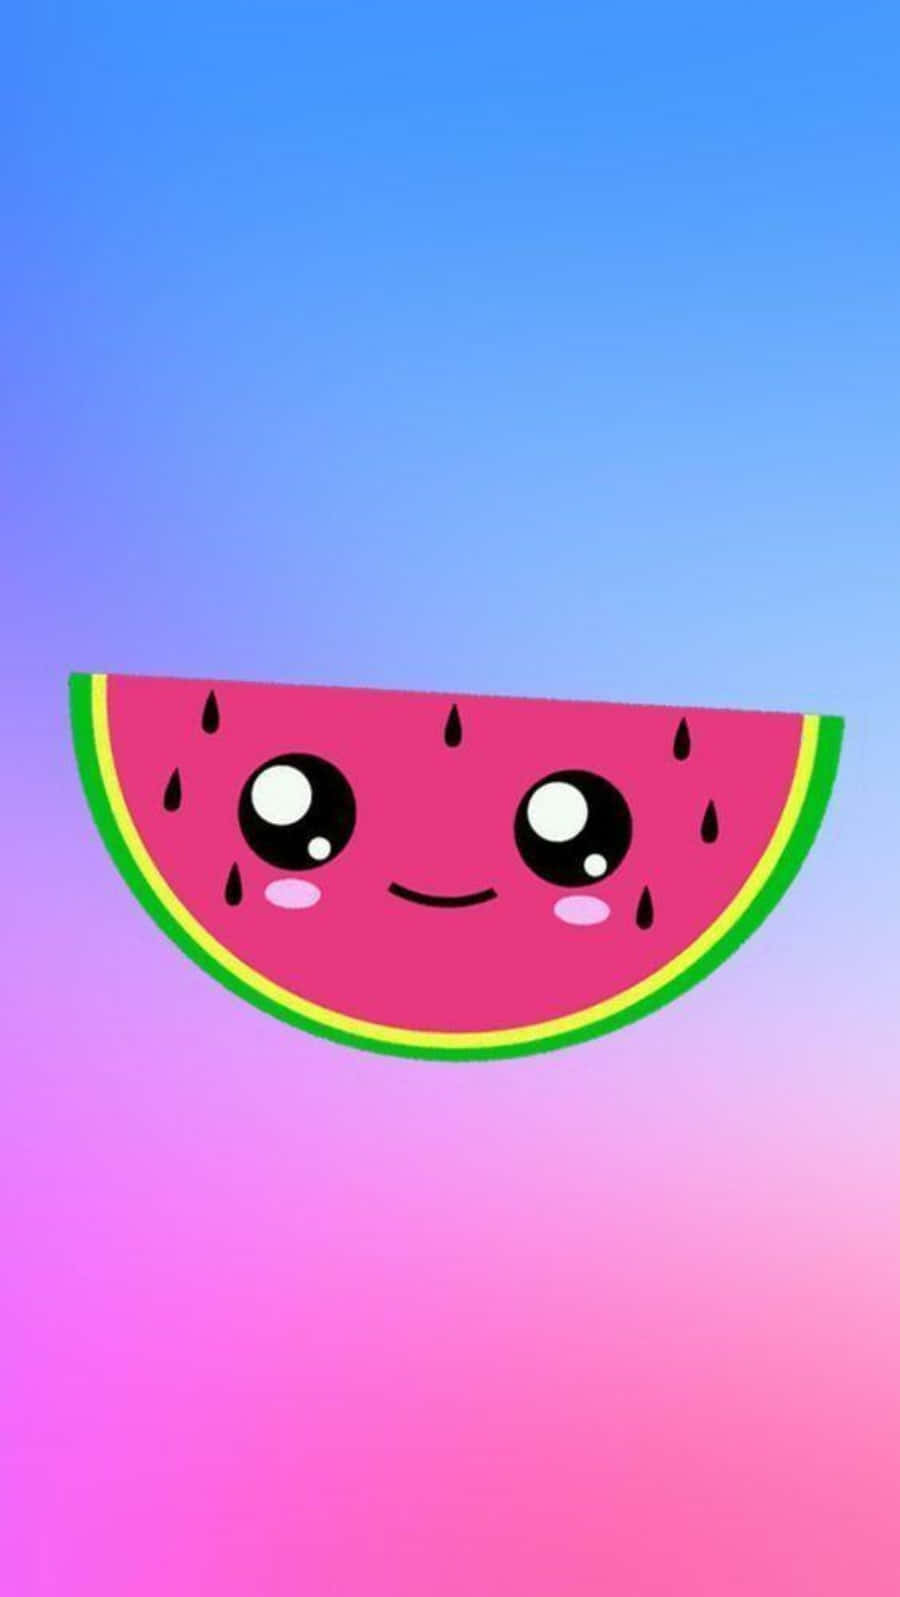 A Watermelon With A Cute Face On It